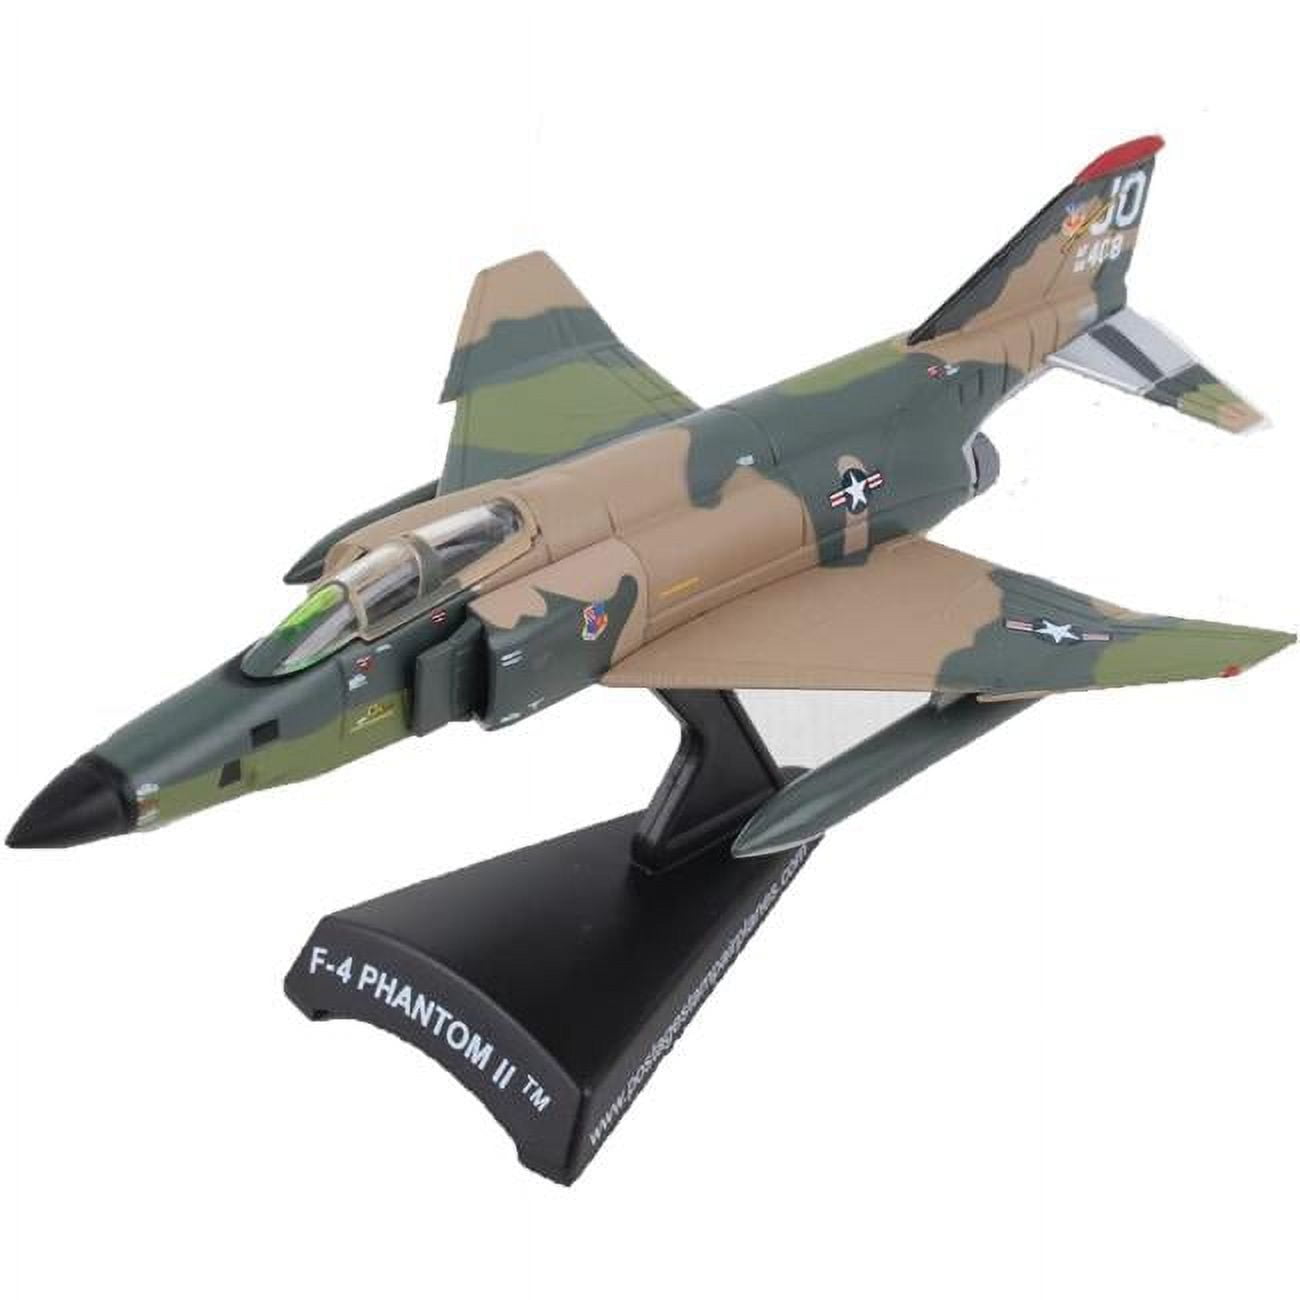 Picture of Postage Stamp Planes PS5384-6 1 by 155 Scale F-4 Phantom II AF-66408 Model Airplane